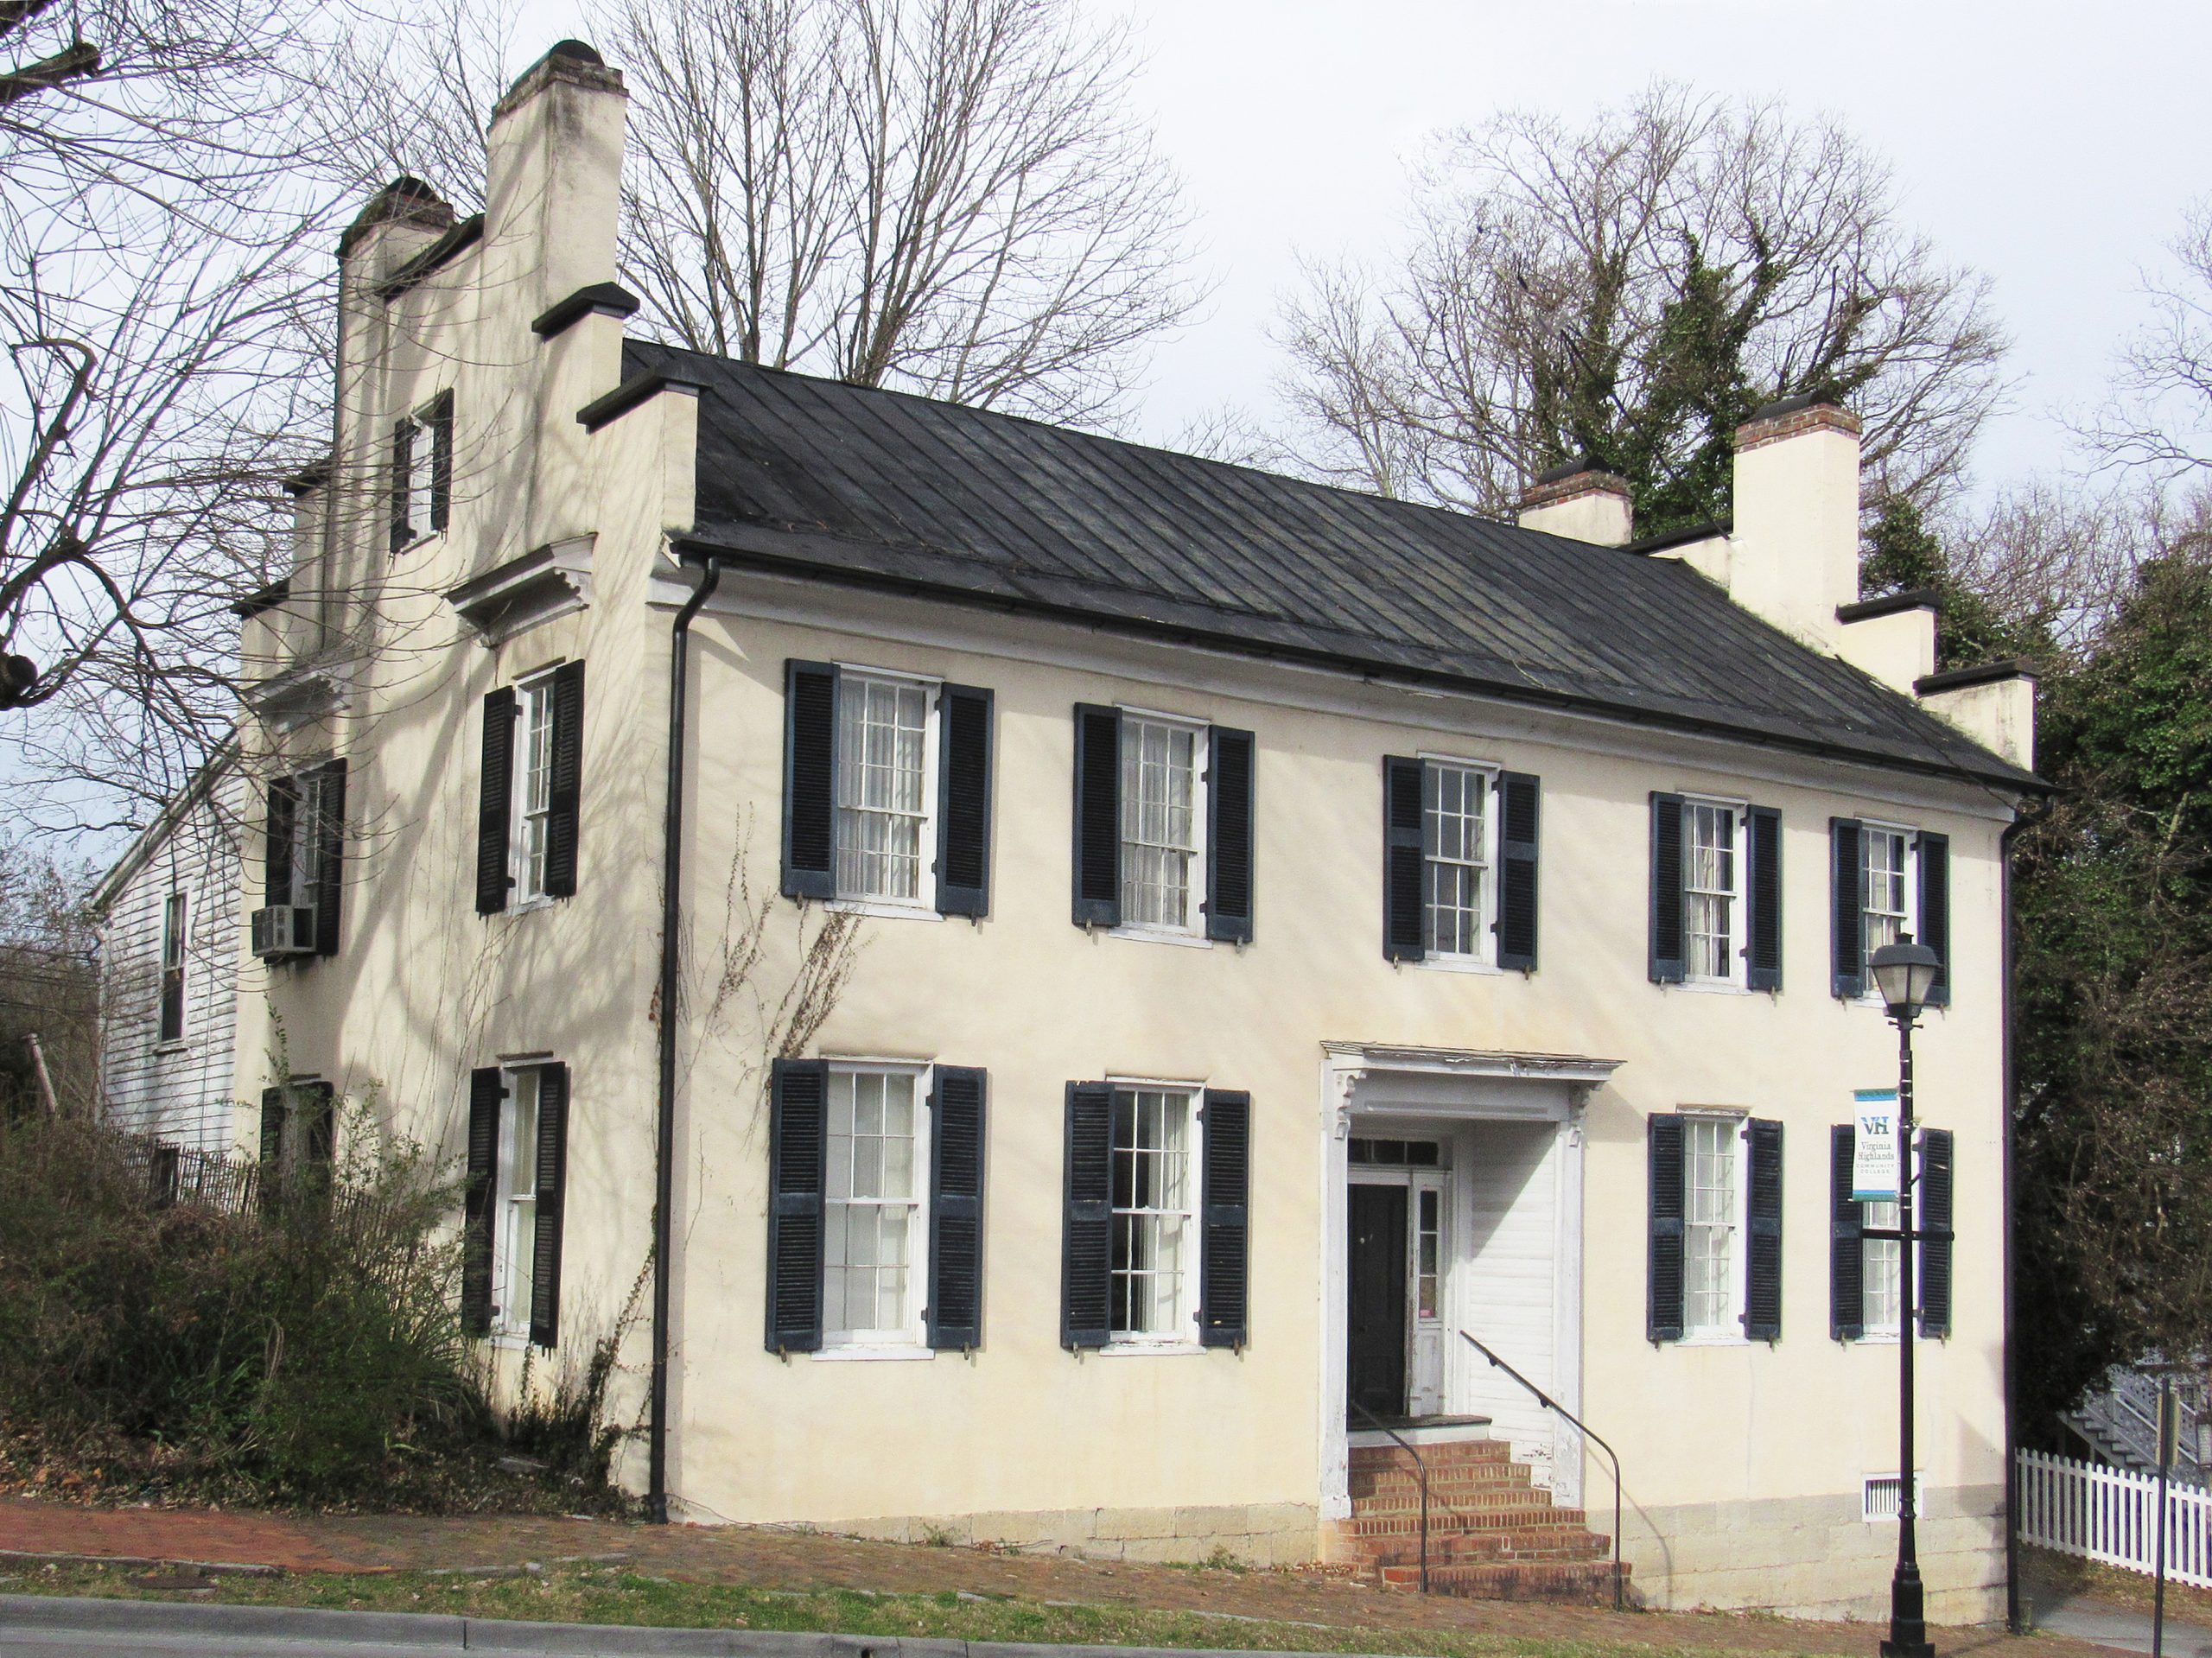 Dr. William H. Pitts House